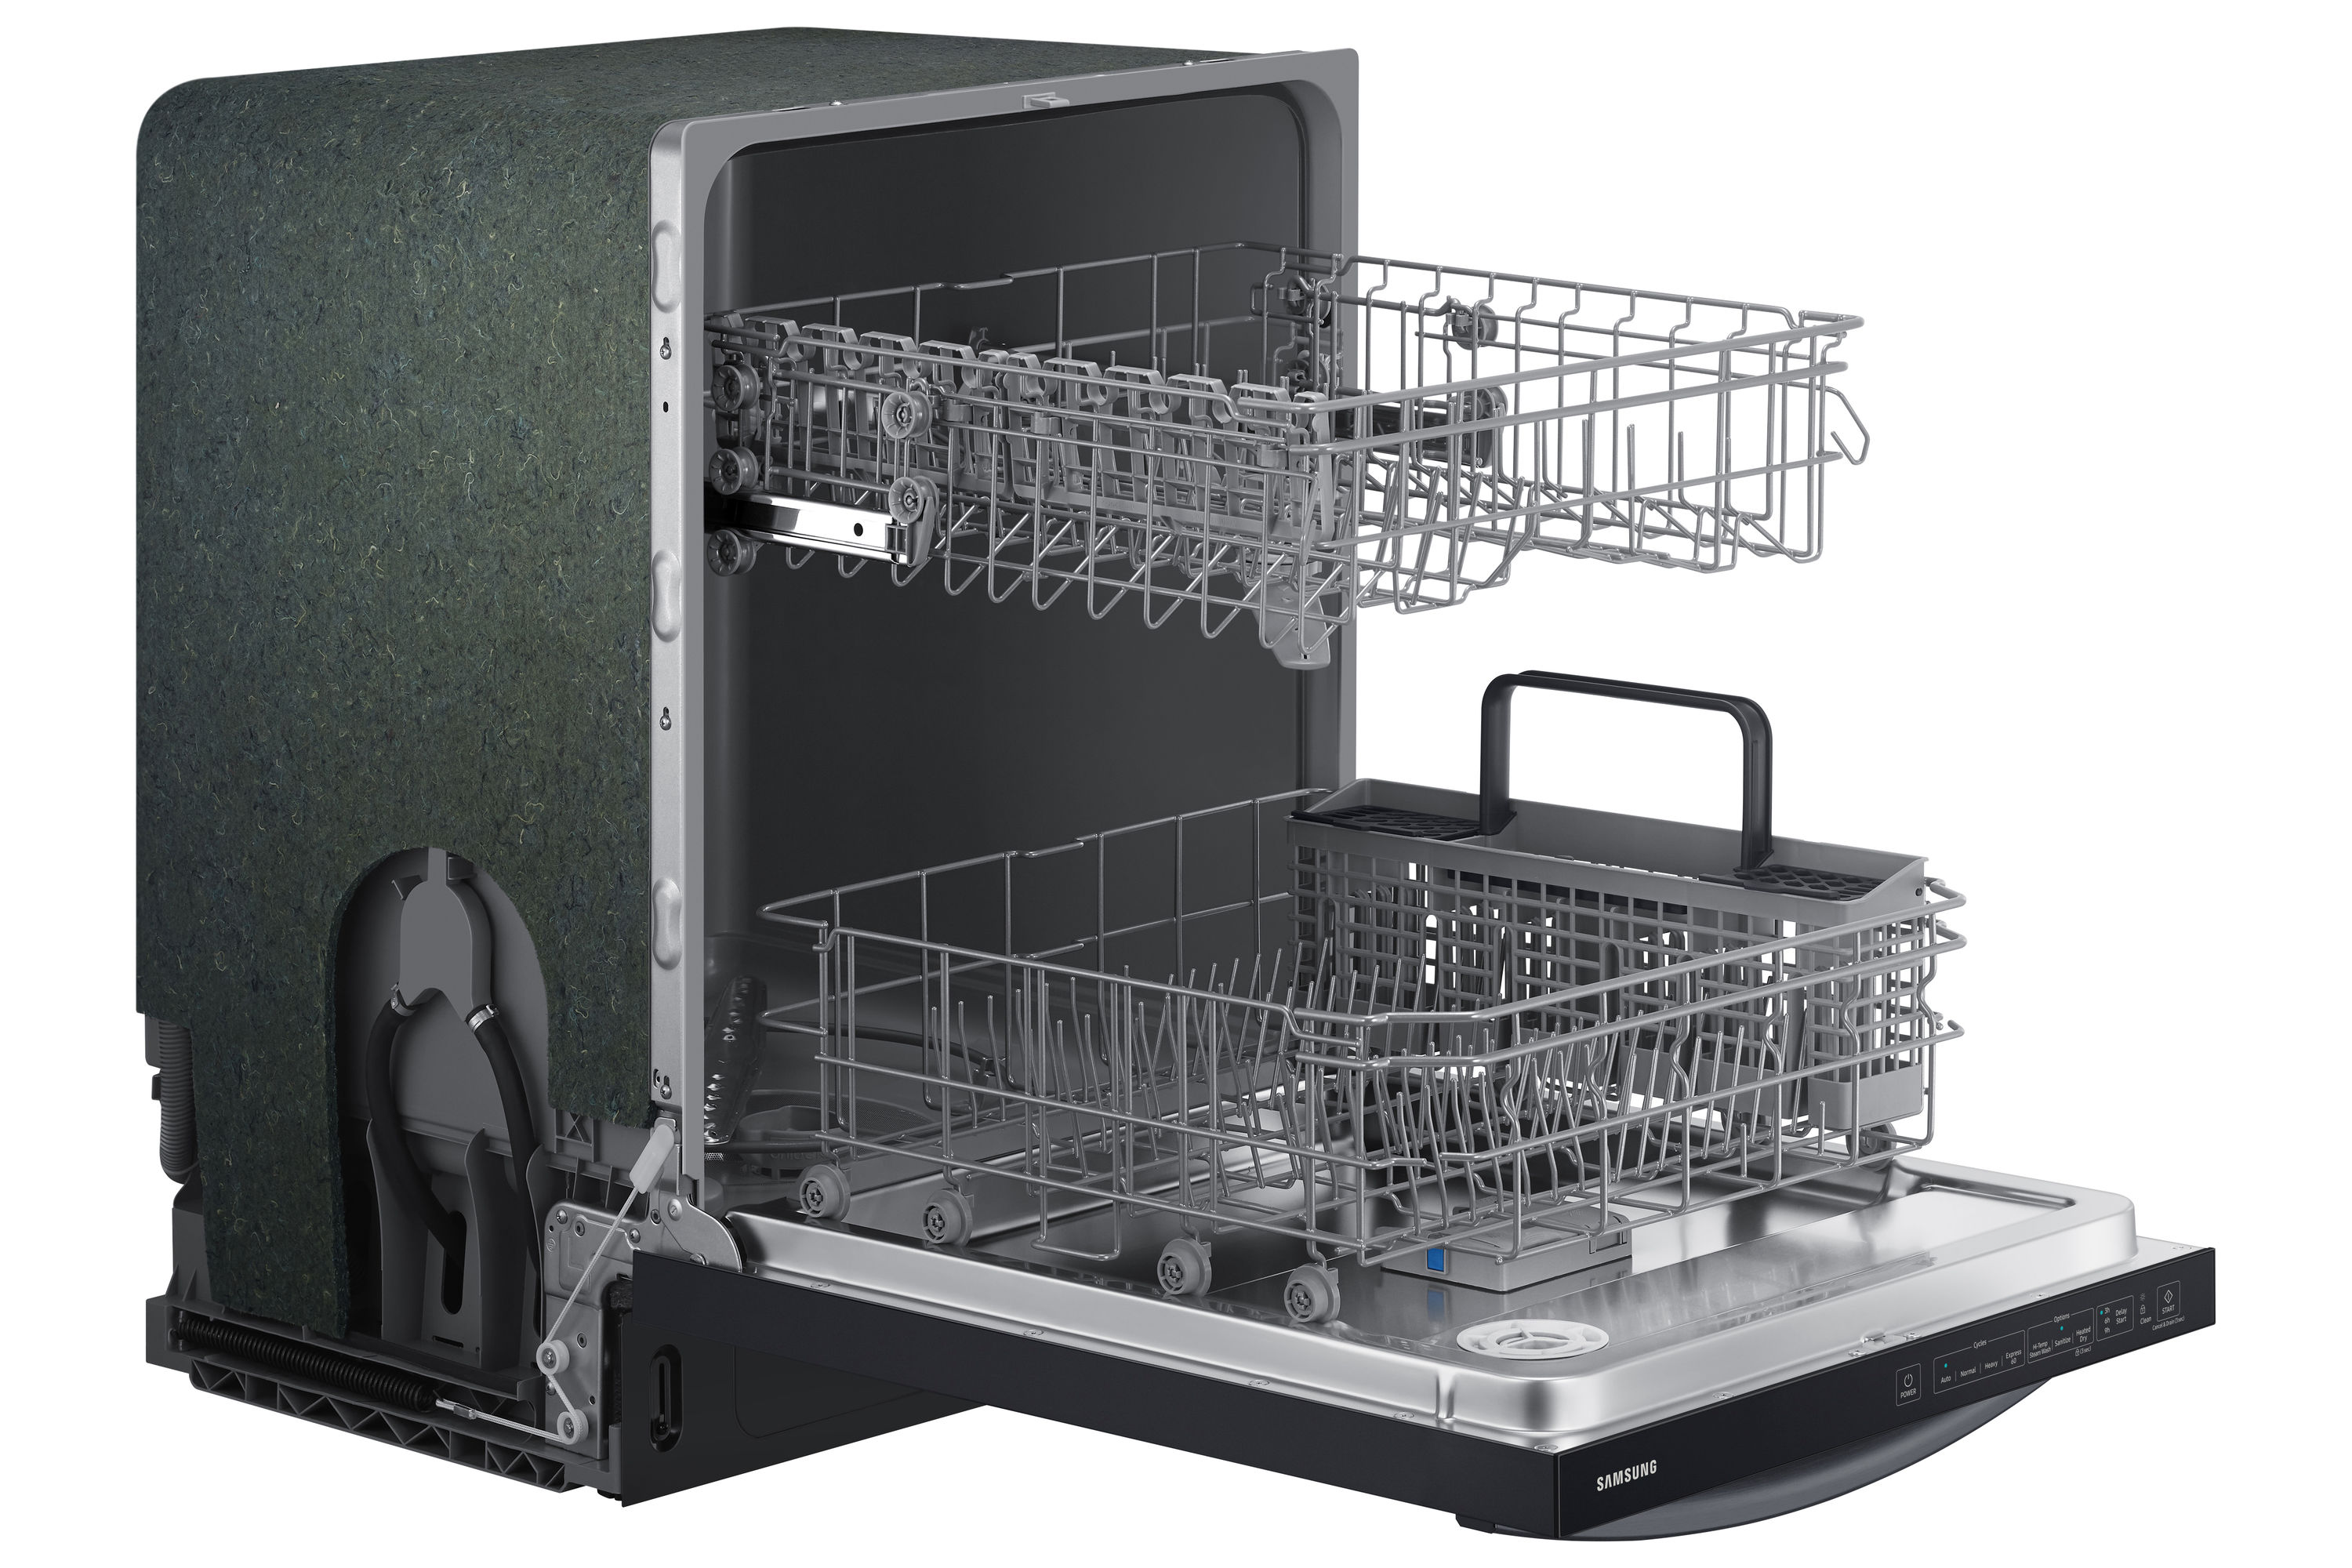 Routine and deep clean your Samsung dishwasher